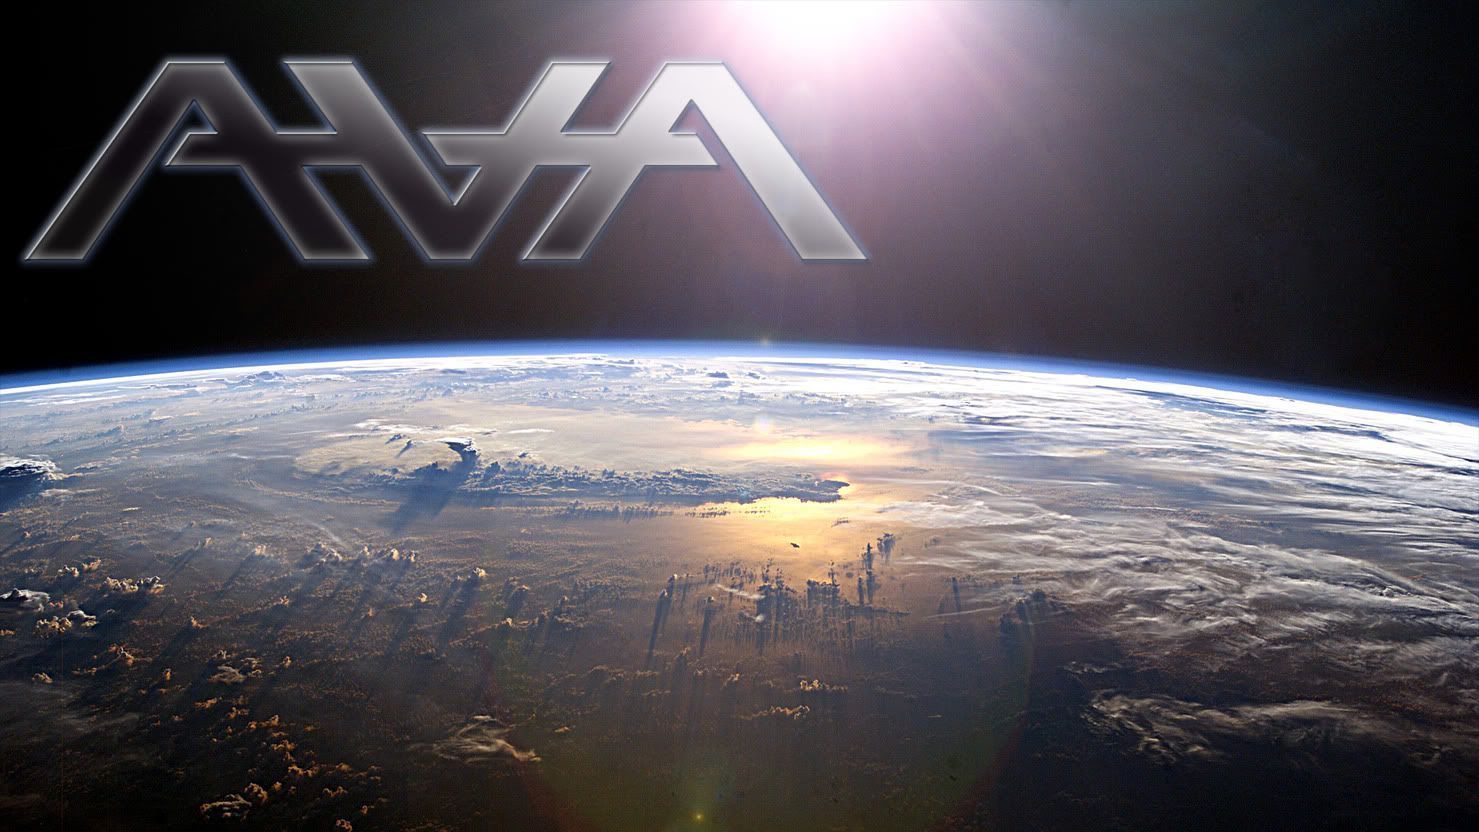 Angels And Airwaves Love Pictures, Images & Photos | Photobucket